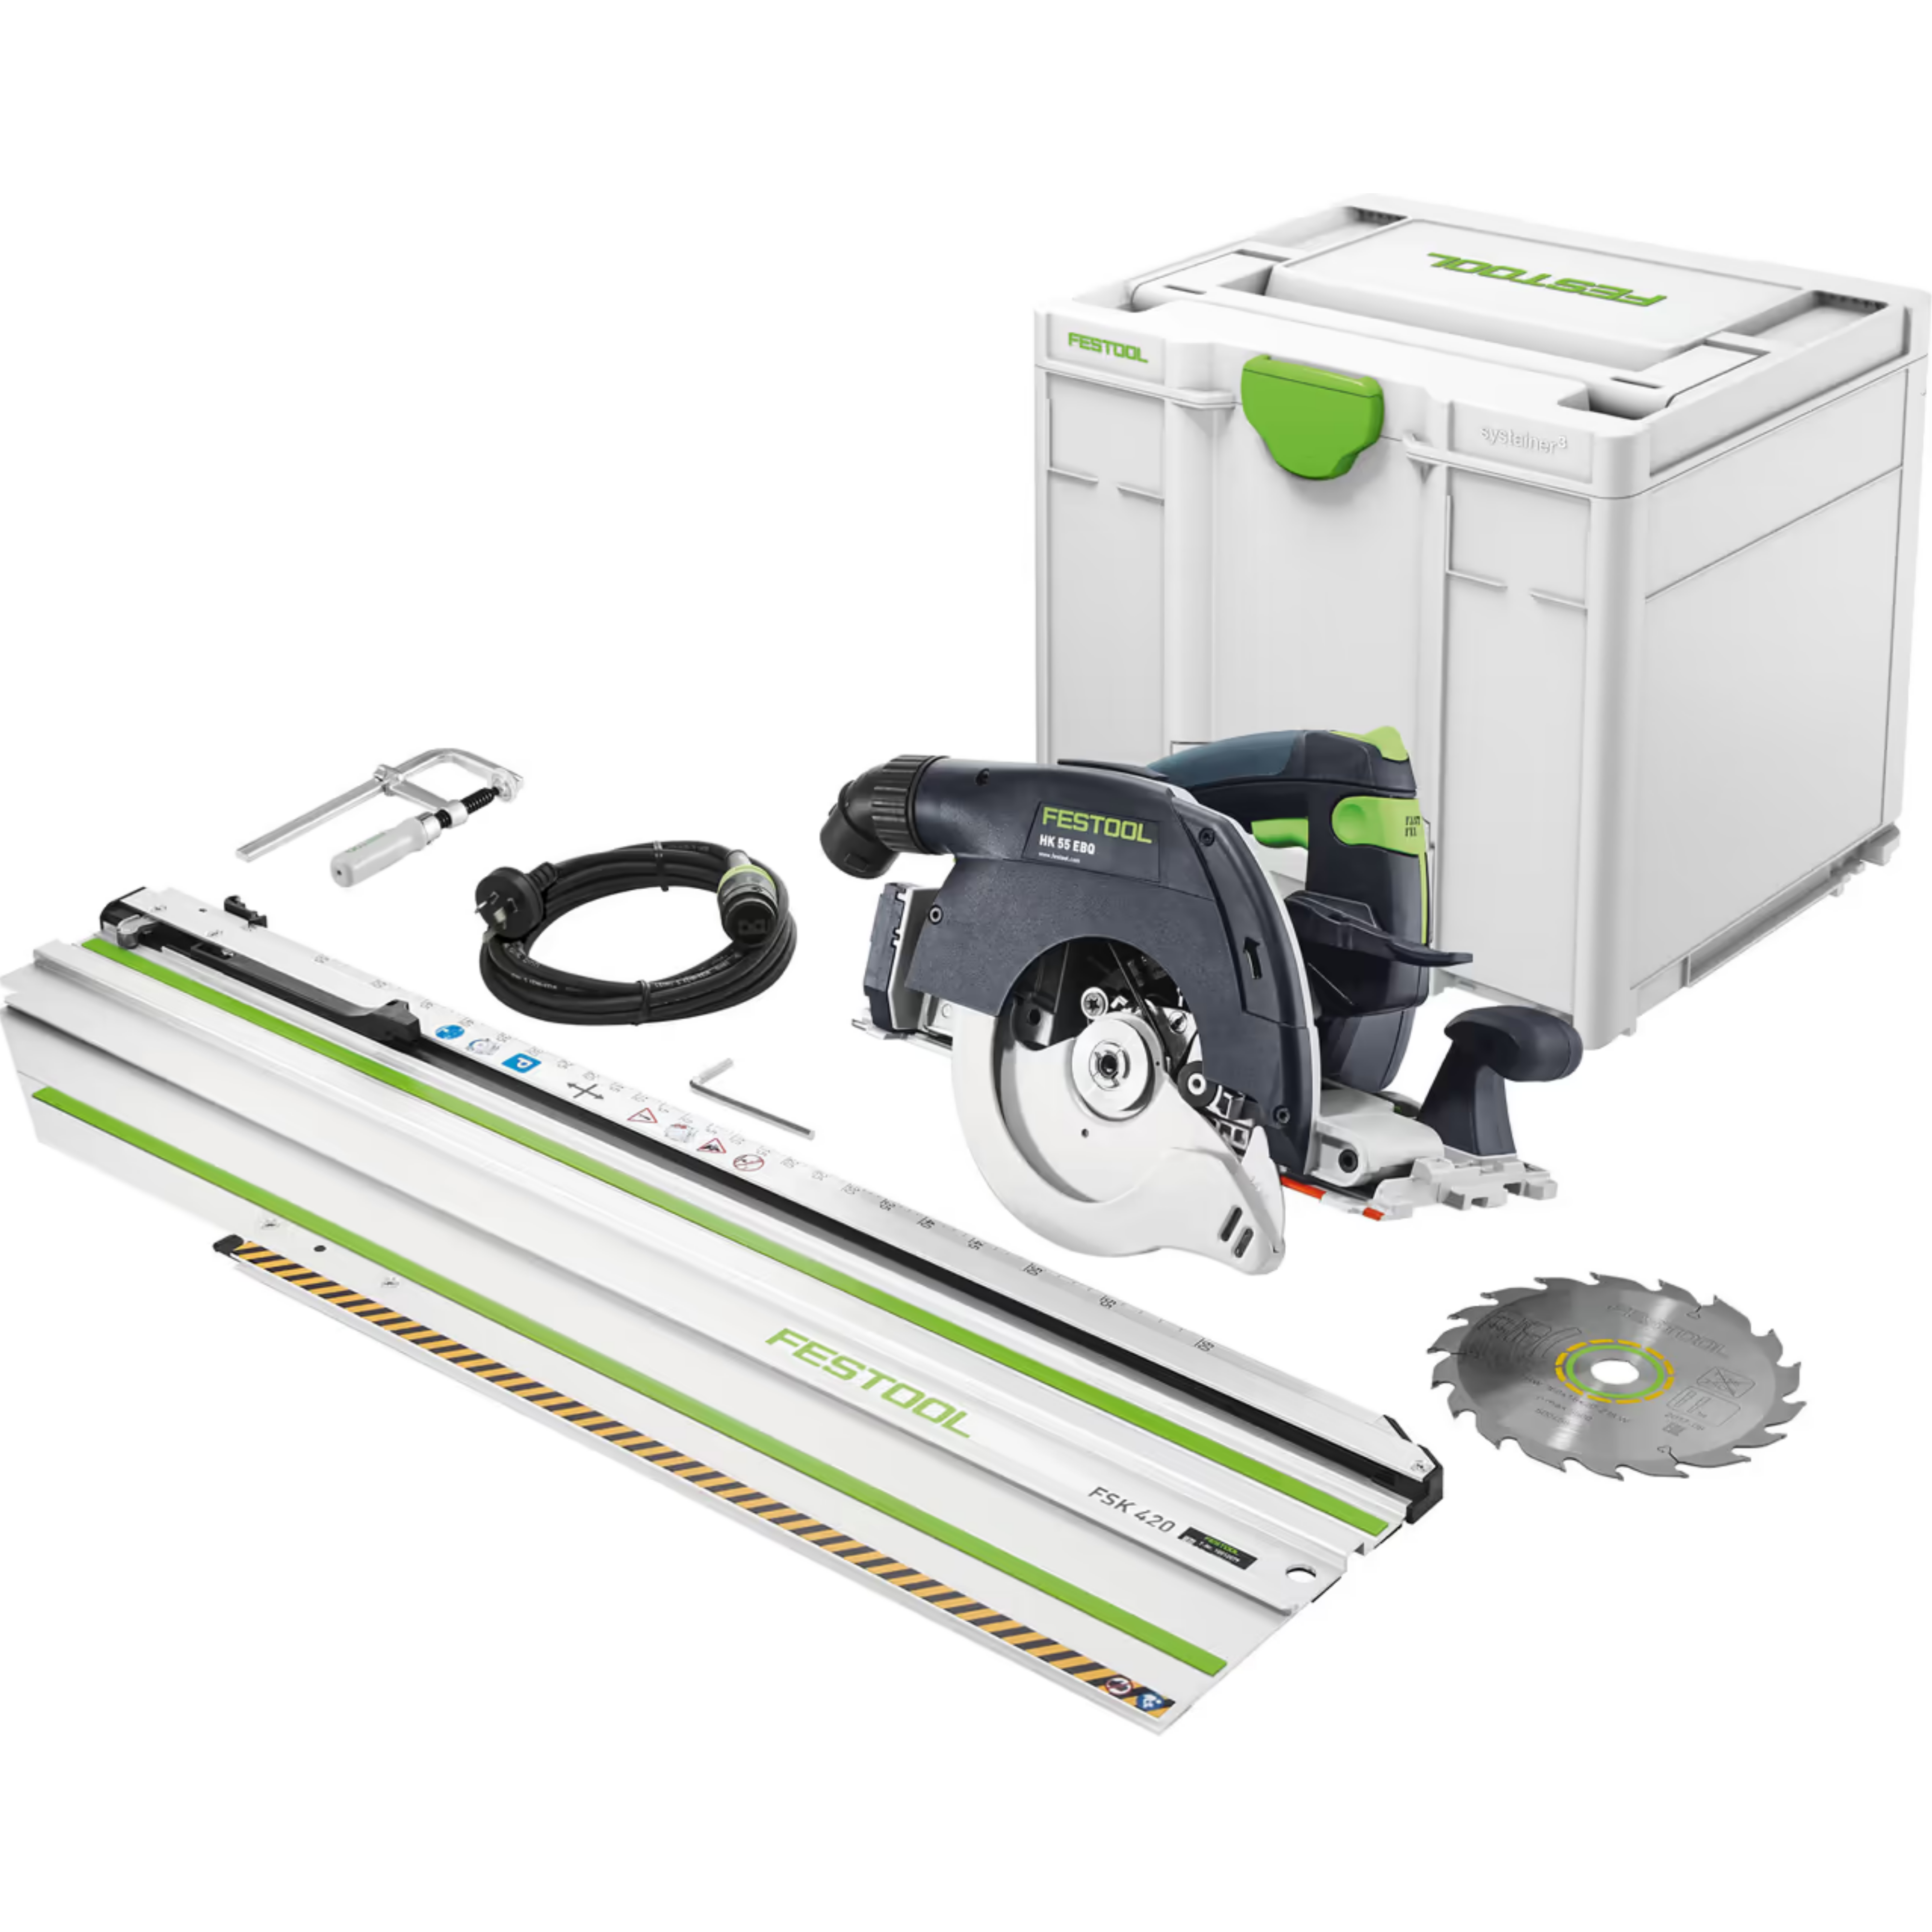 HK 55 160mm Circular Saw in Systainer with 420mm Cross Cut Rail 576132 by Festool